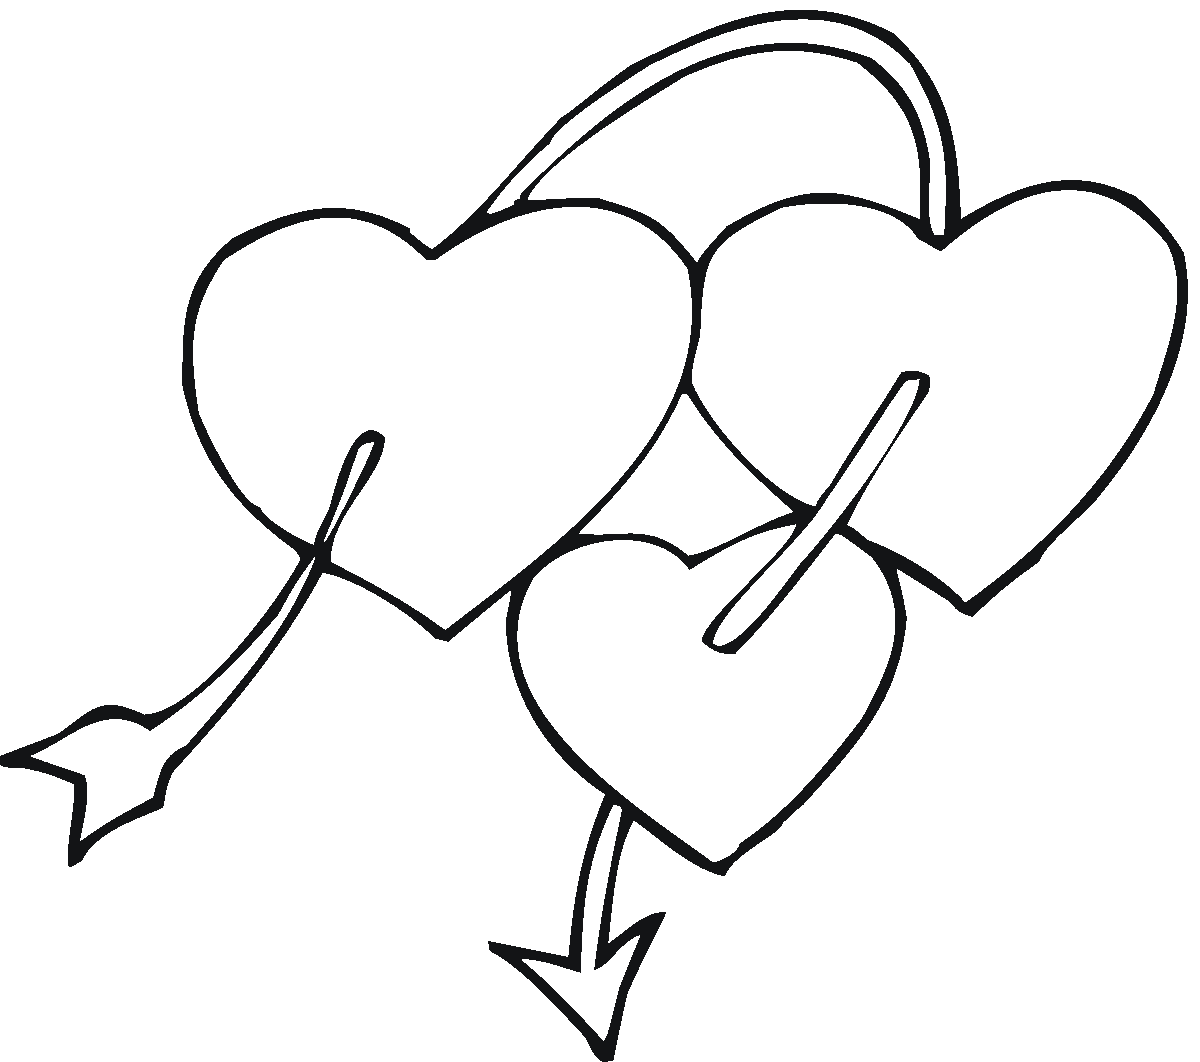 50-free-printable-valentine-s-day-coloring-pages-printable-valentines